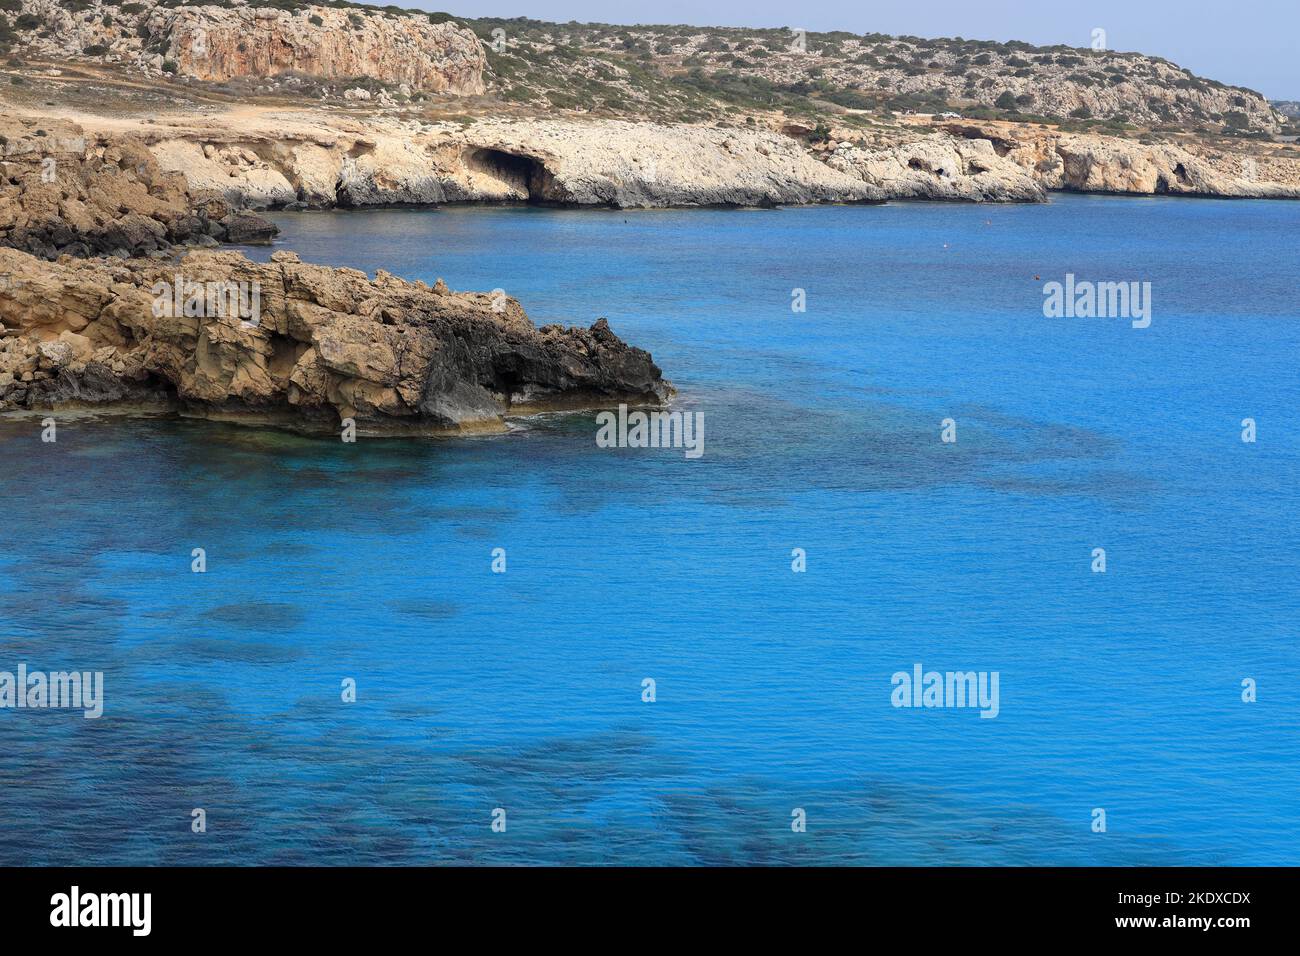 May 25, 2022, Larnaca, Cyprus: Deep blue Mediterranean Sea at Cape Greco National Forest Park at the southern end of Famagusta Bay and forms part of Ayia Napa Municipality. The Republic of Cyprus stands at a historic and cultural crossroads between Europe and Asia. Its chief cities-the capital of Nicosia, Limassol, Famagusta, and Paphos have absorbed the influences of generations of conquerors, pilgrims, and travelers and have an air that is both cosmopolitan and provincial. Today Cyprus is a popular tourist destination for visitors from Europe, favored by honeymooners (Credit Image: © Ruarid Stock Photo